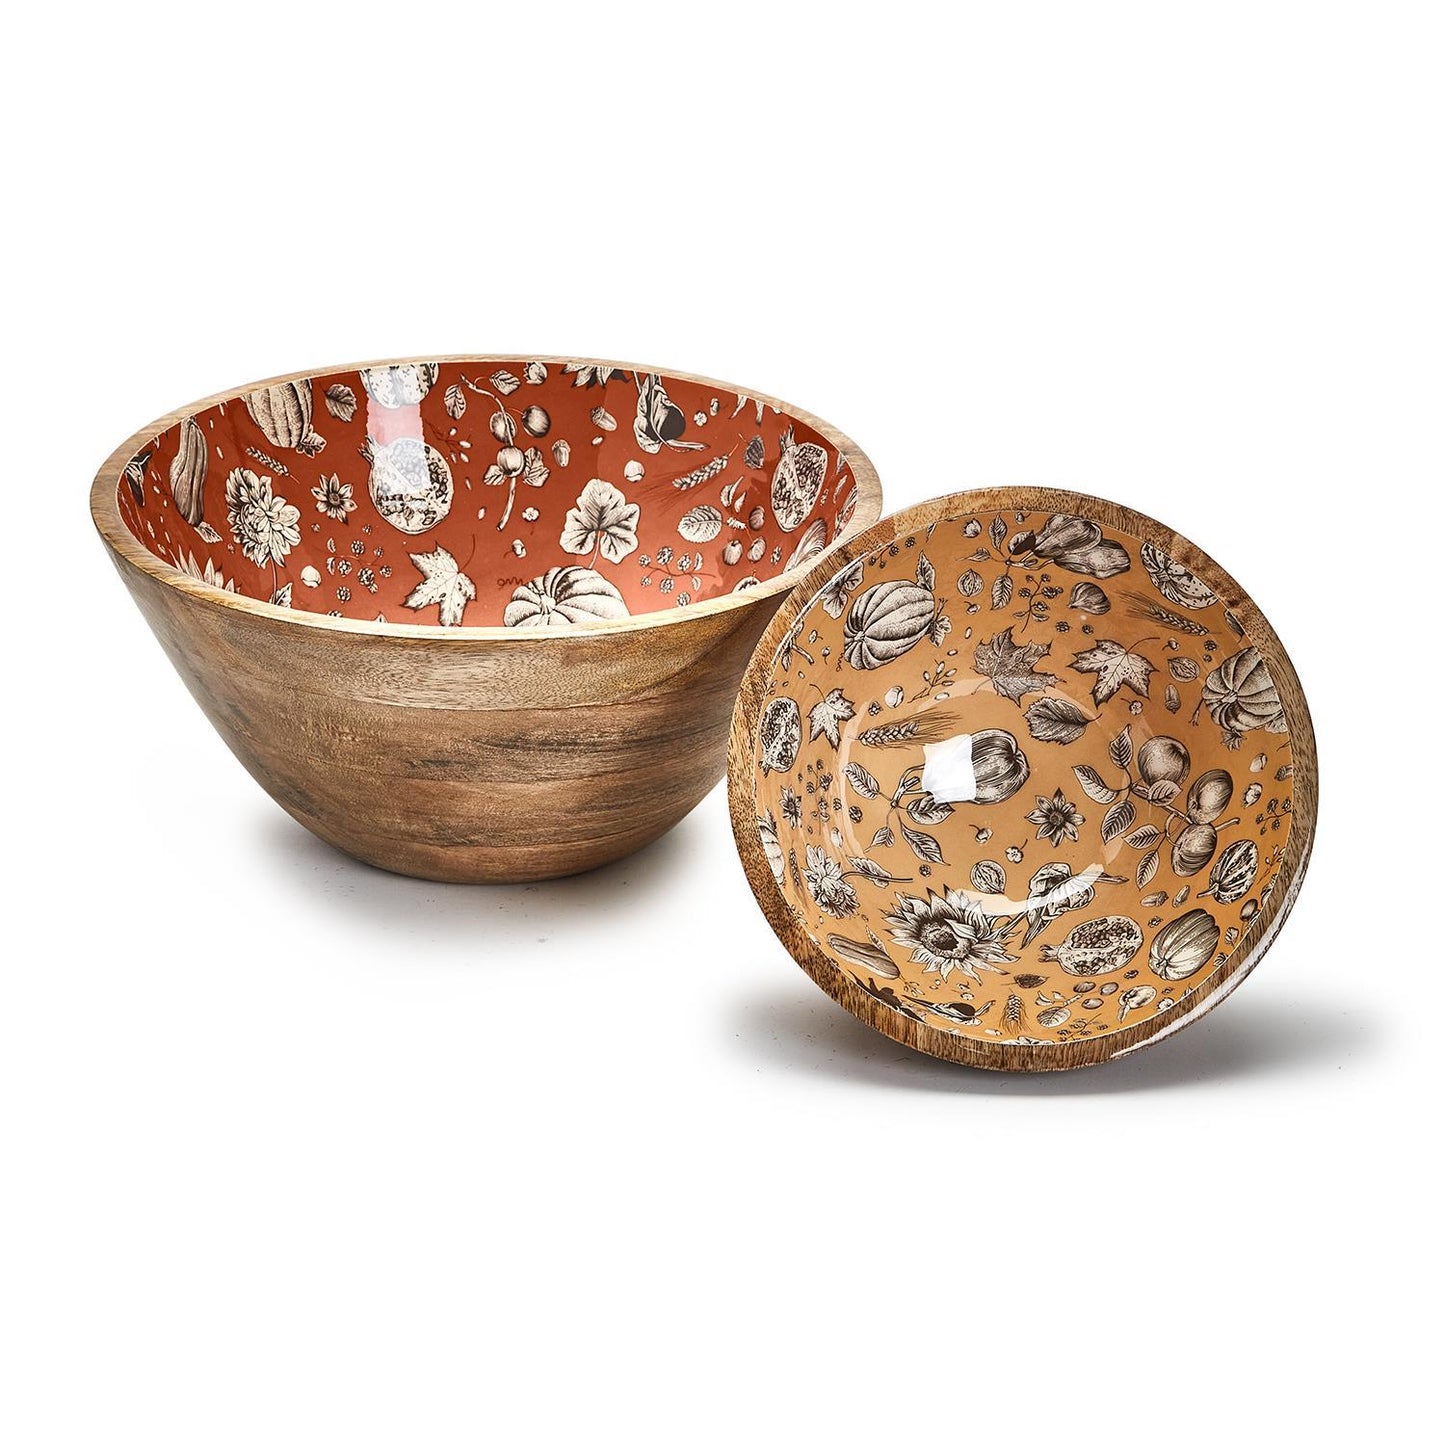 Two's Autumn Soiree Hand-Crafted Set Of 2 Wooden Bowls w/ Enamel in 2 Sizes